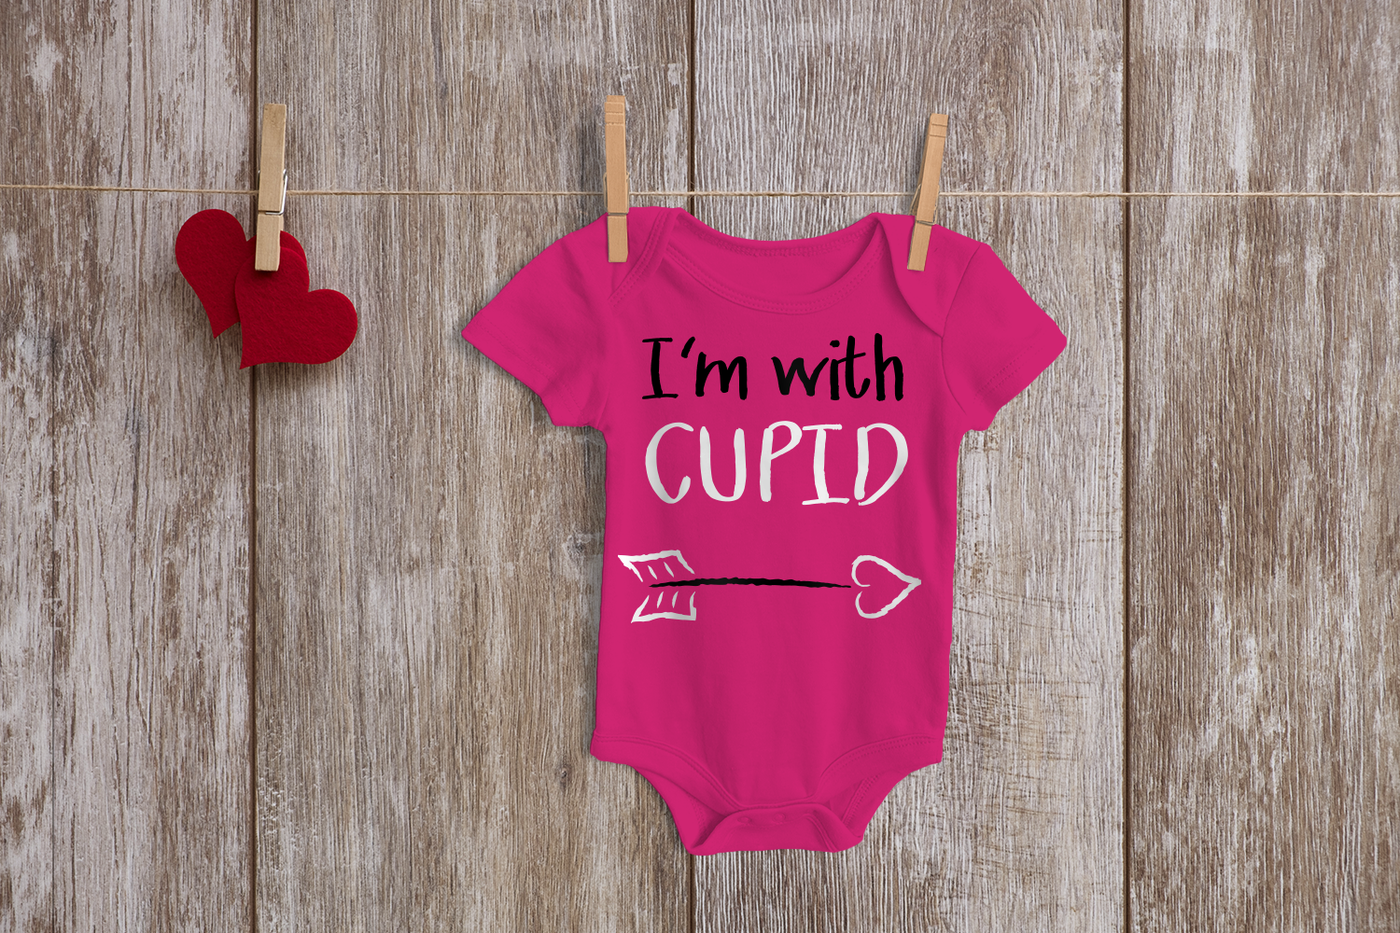 Baby onesie with a design that says "I'm with cupid" and a cupid's arrow.